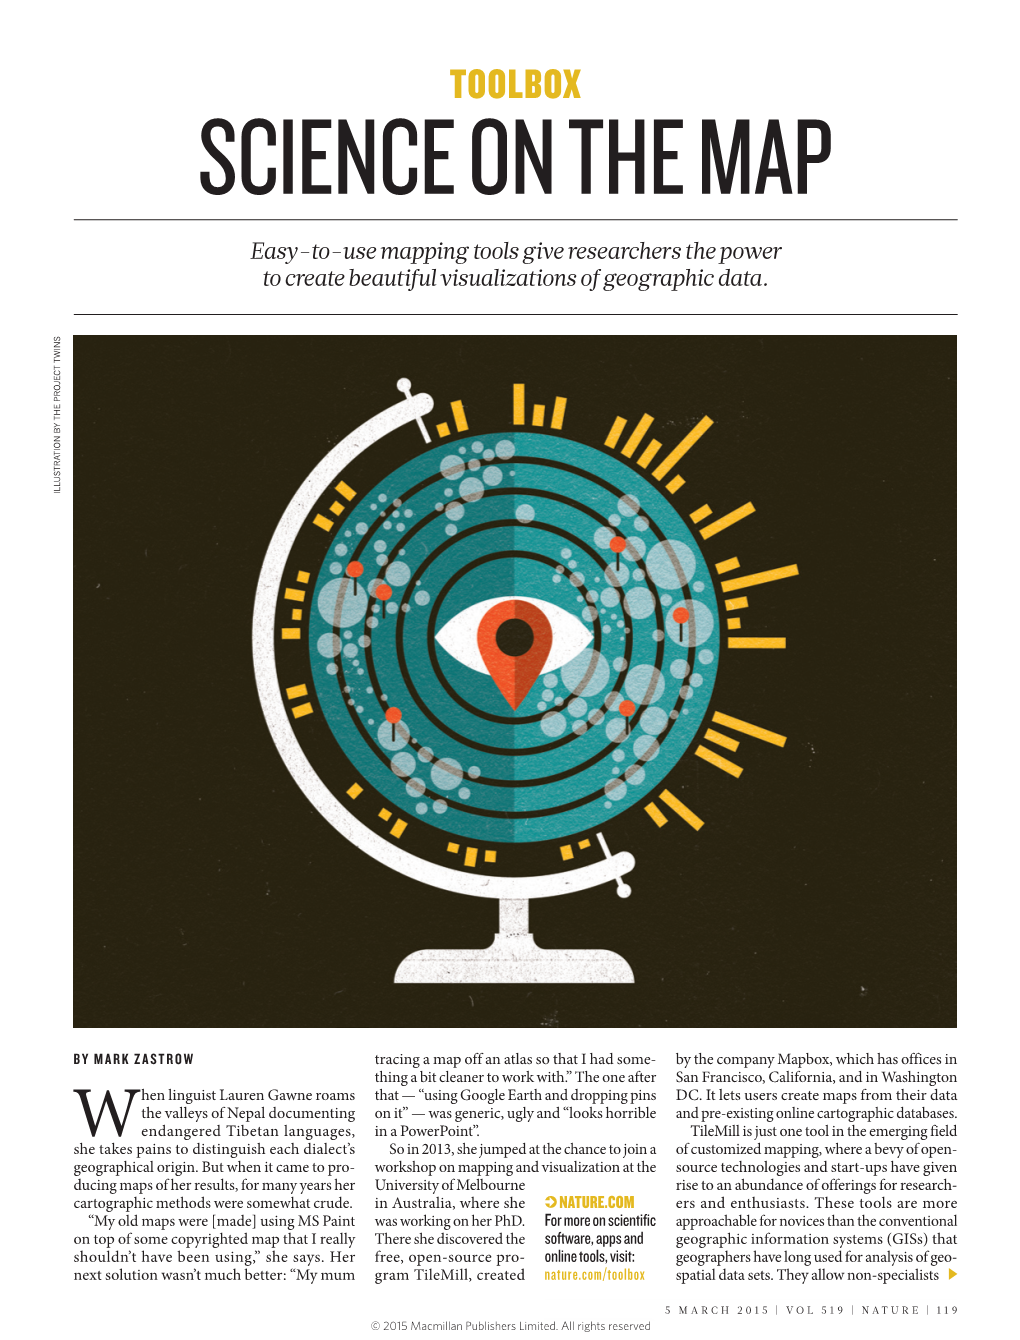 Science on the Map